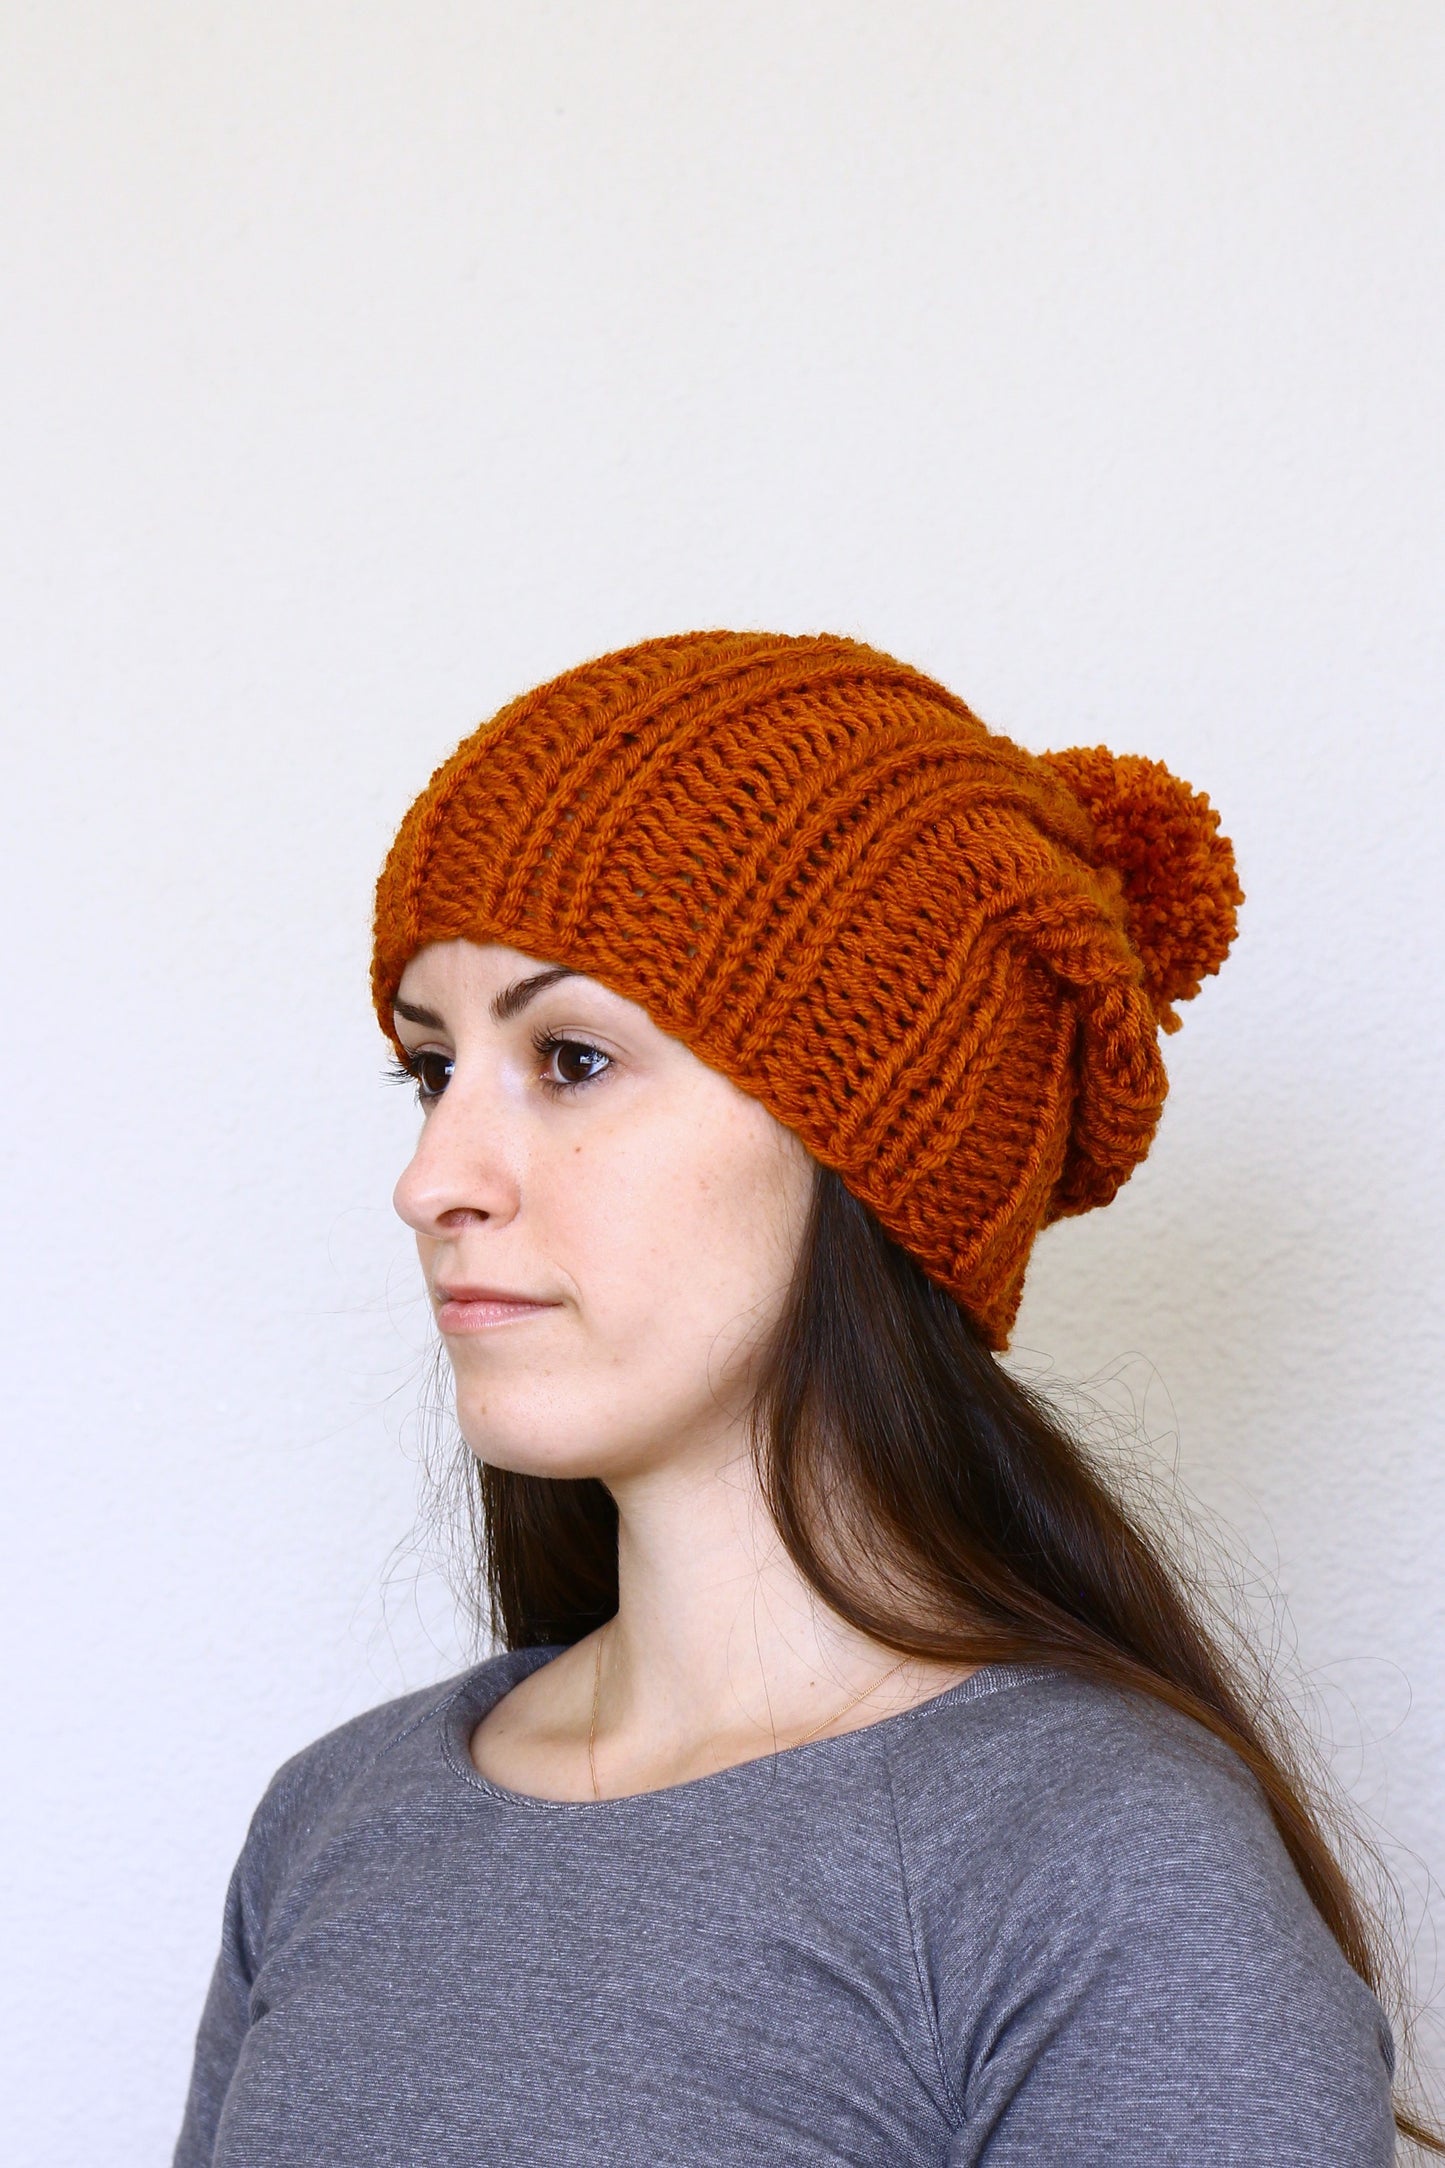 Knit beanie hat, slouchy hat in rust orange color